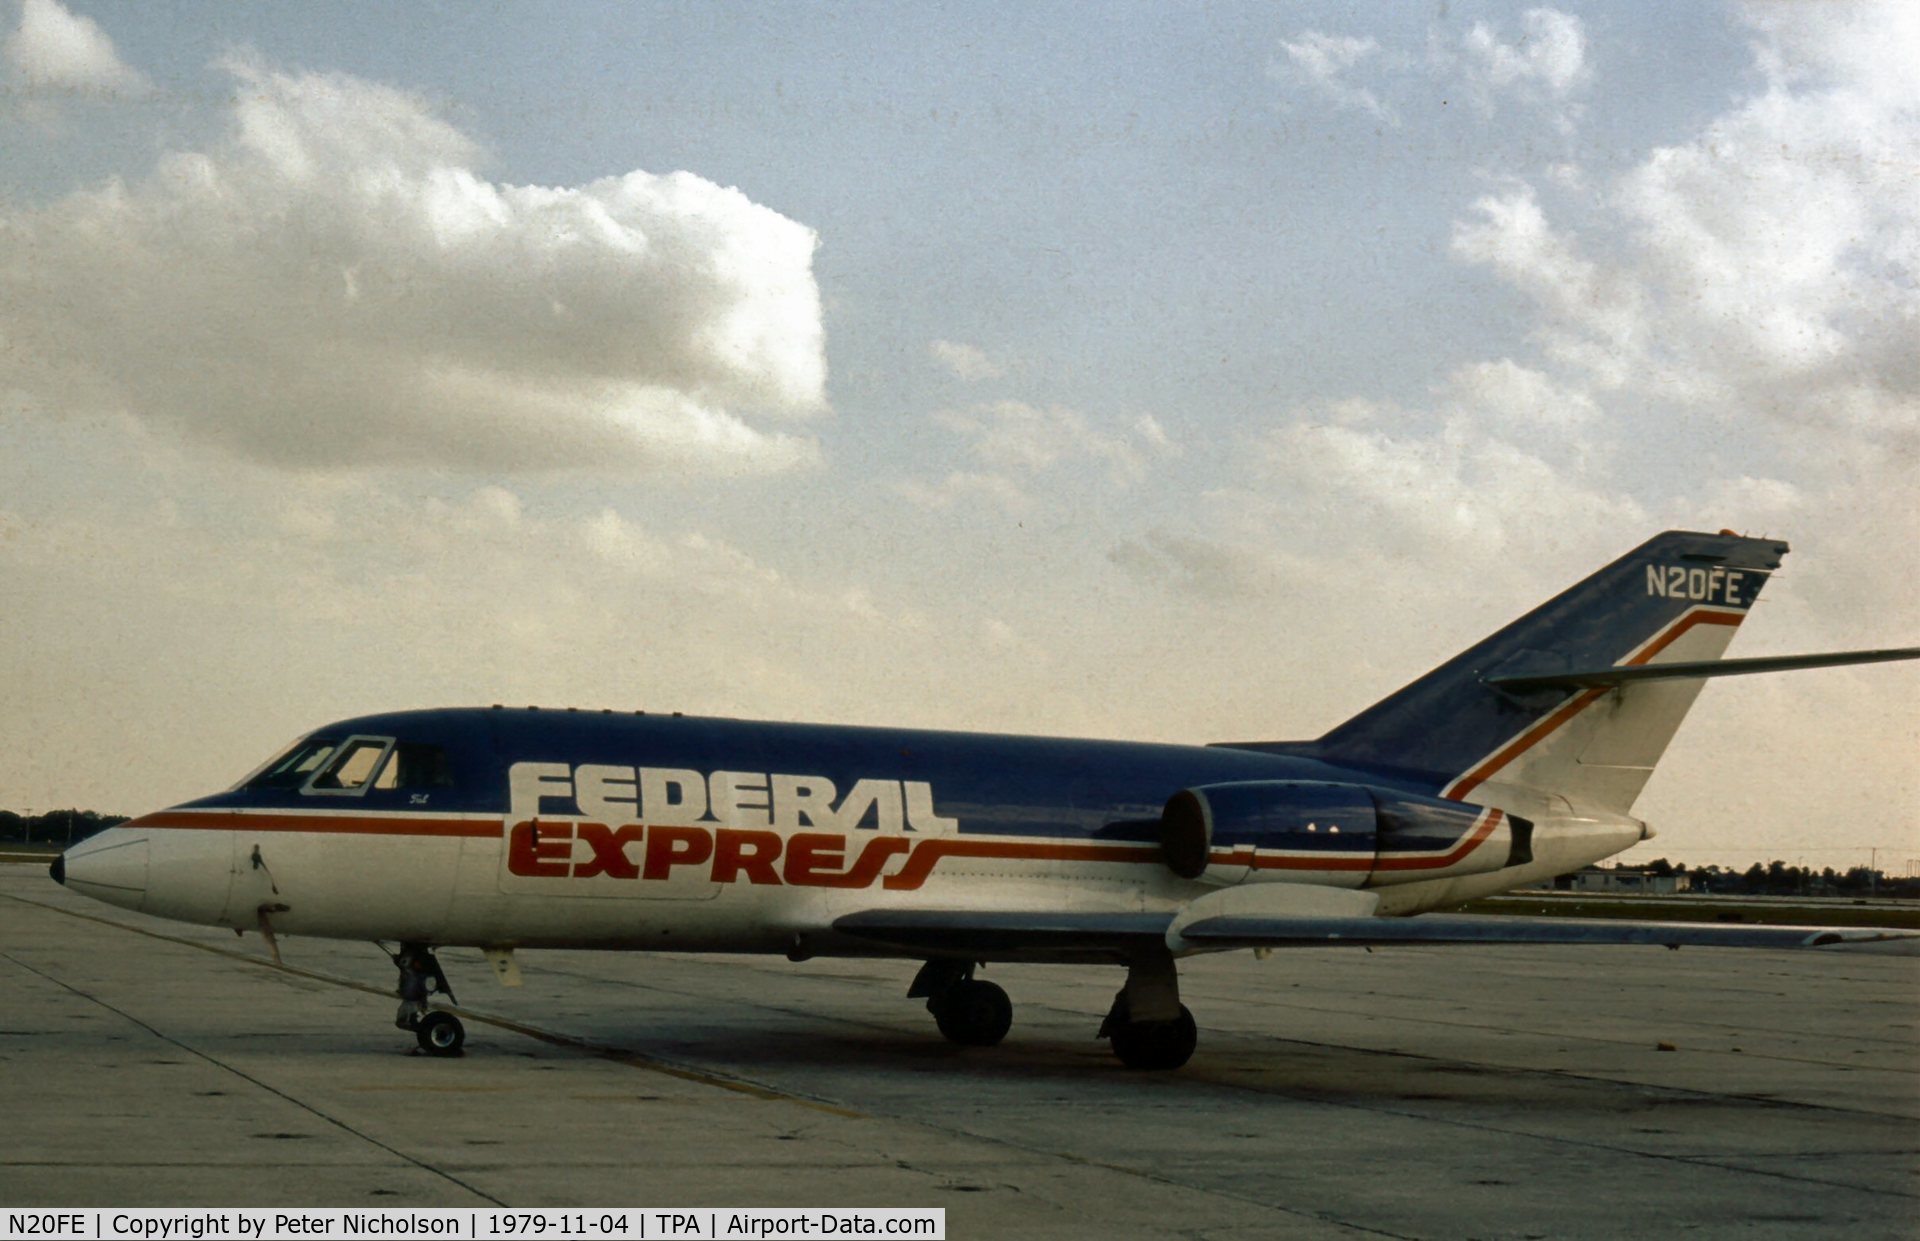 N20FE, Dassault Falcon (Mystere) 20DC C/N 235, Falcon 20 of Federal Express named Tai at Tampa in November 1979.